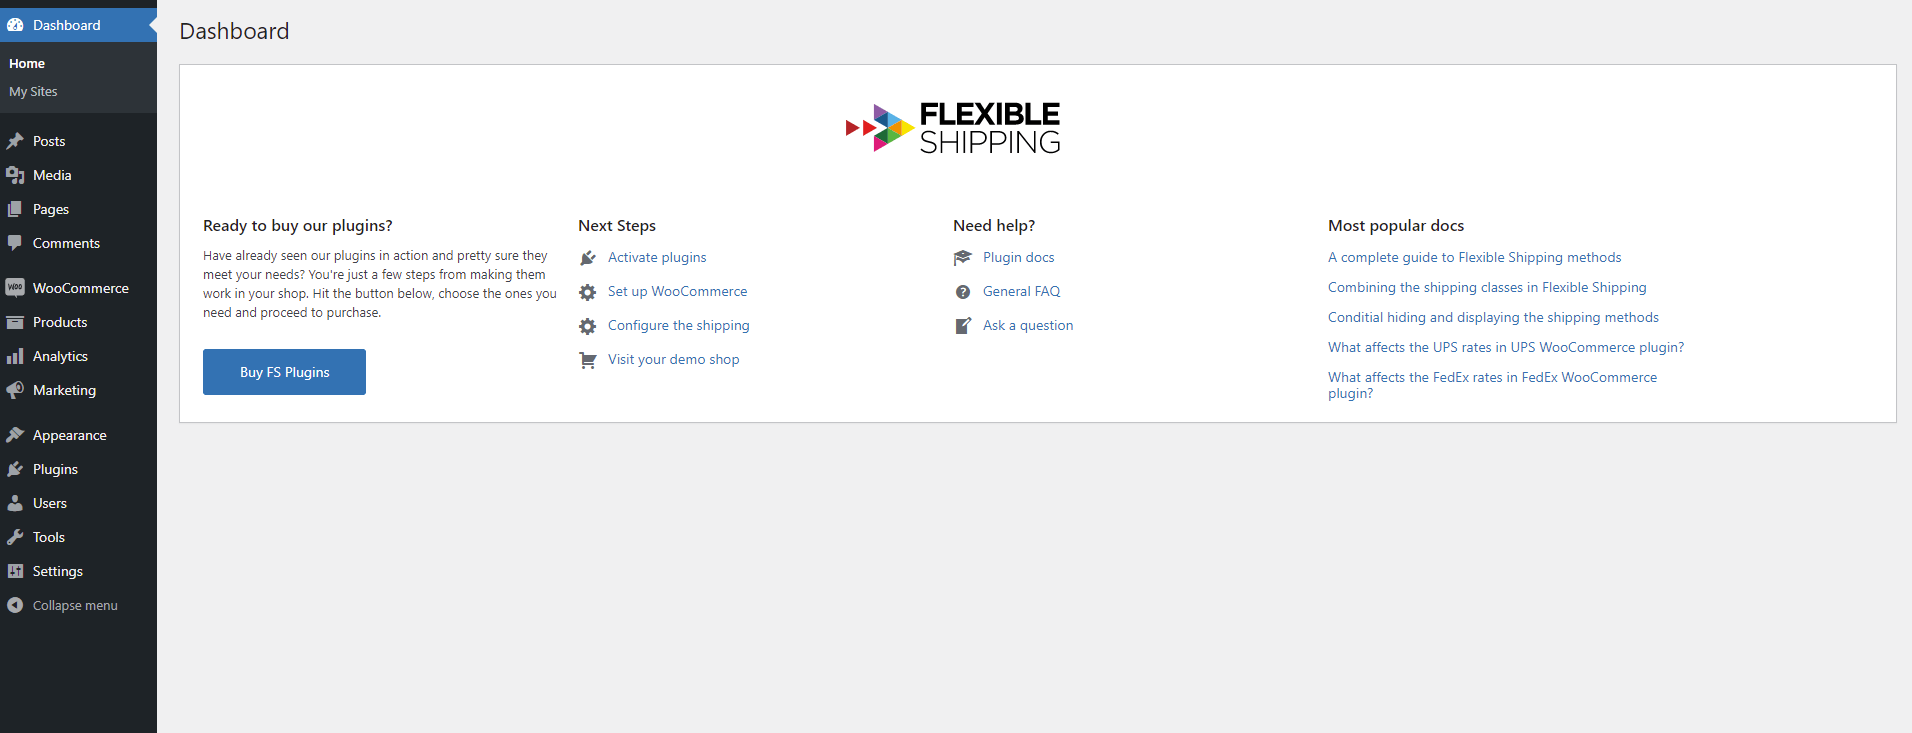 Flexible Shipping Demo Welcome Page